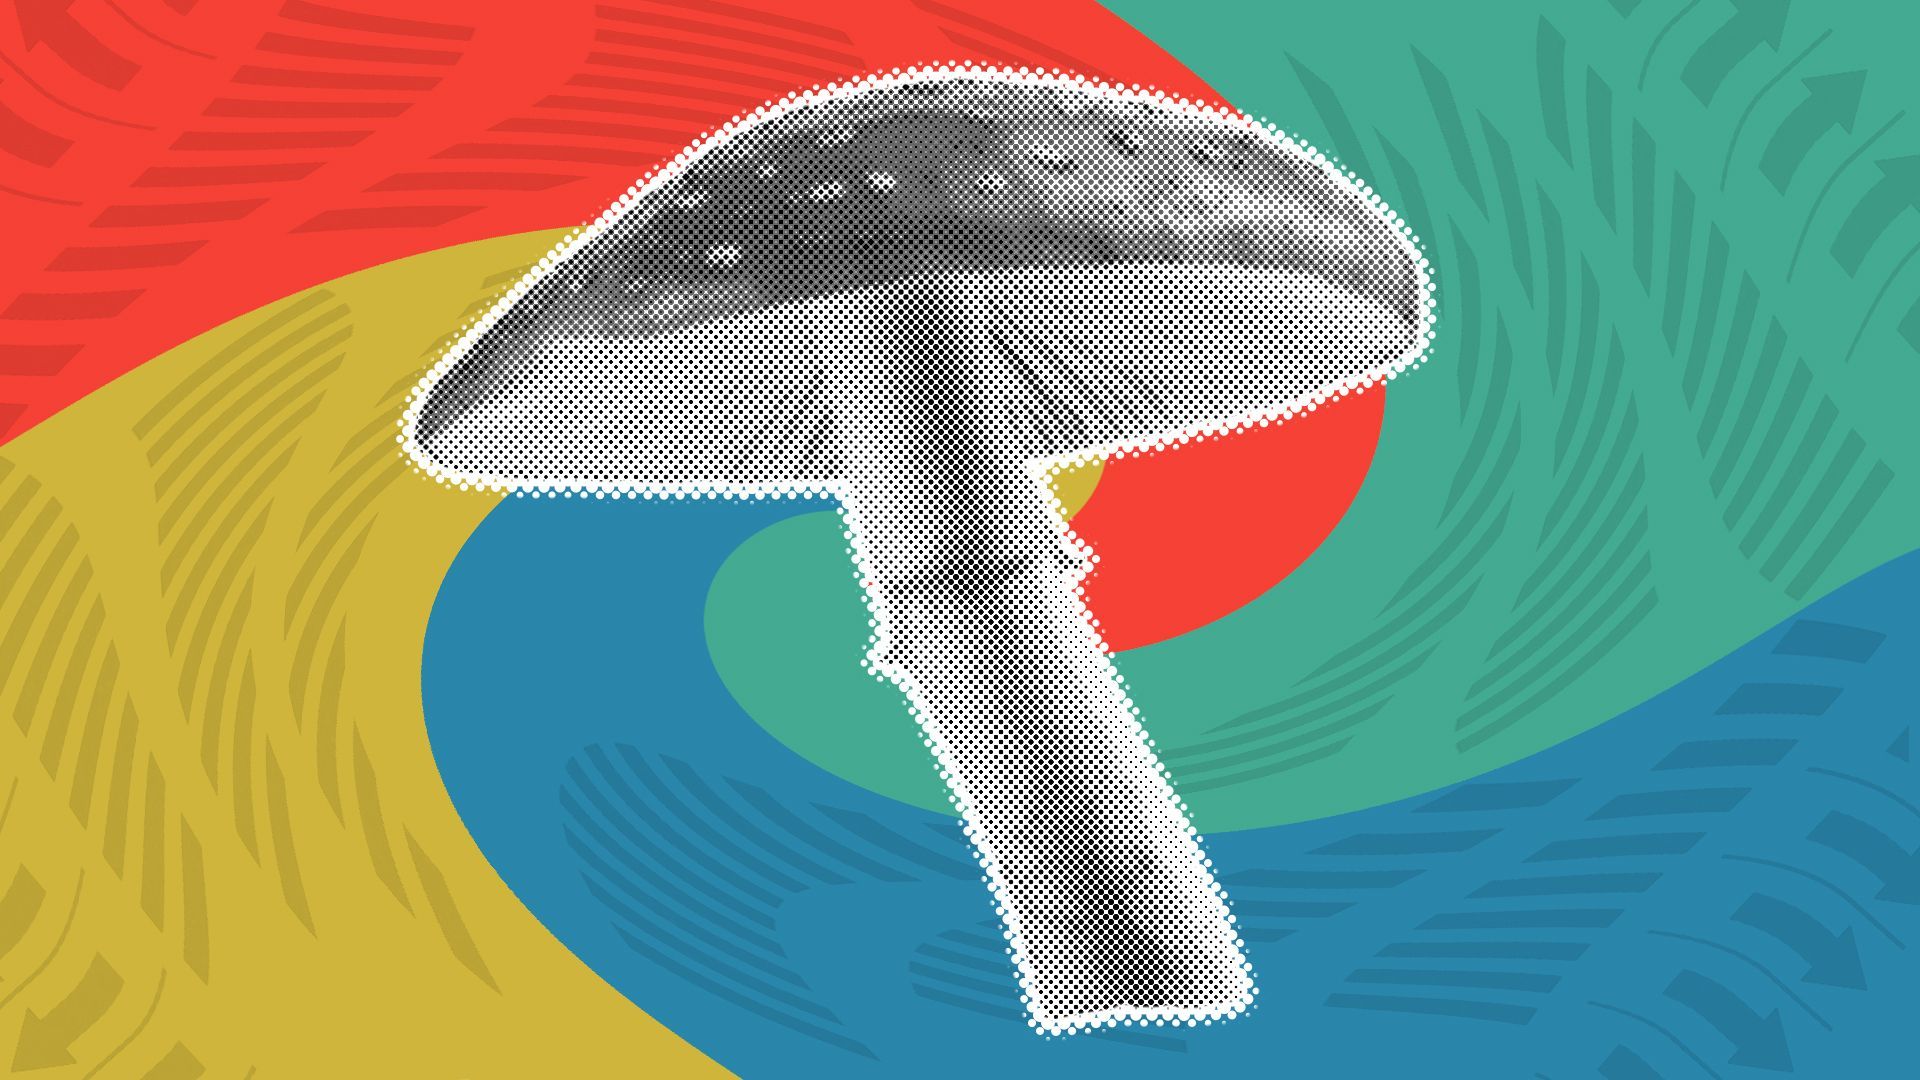 Illustration of a mushroom surrounded by swirling ballot shapes and colors